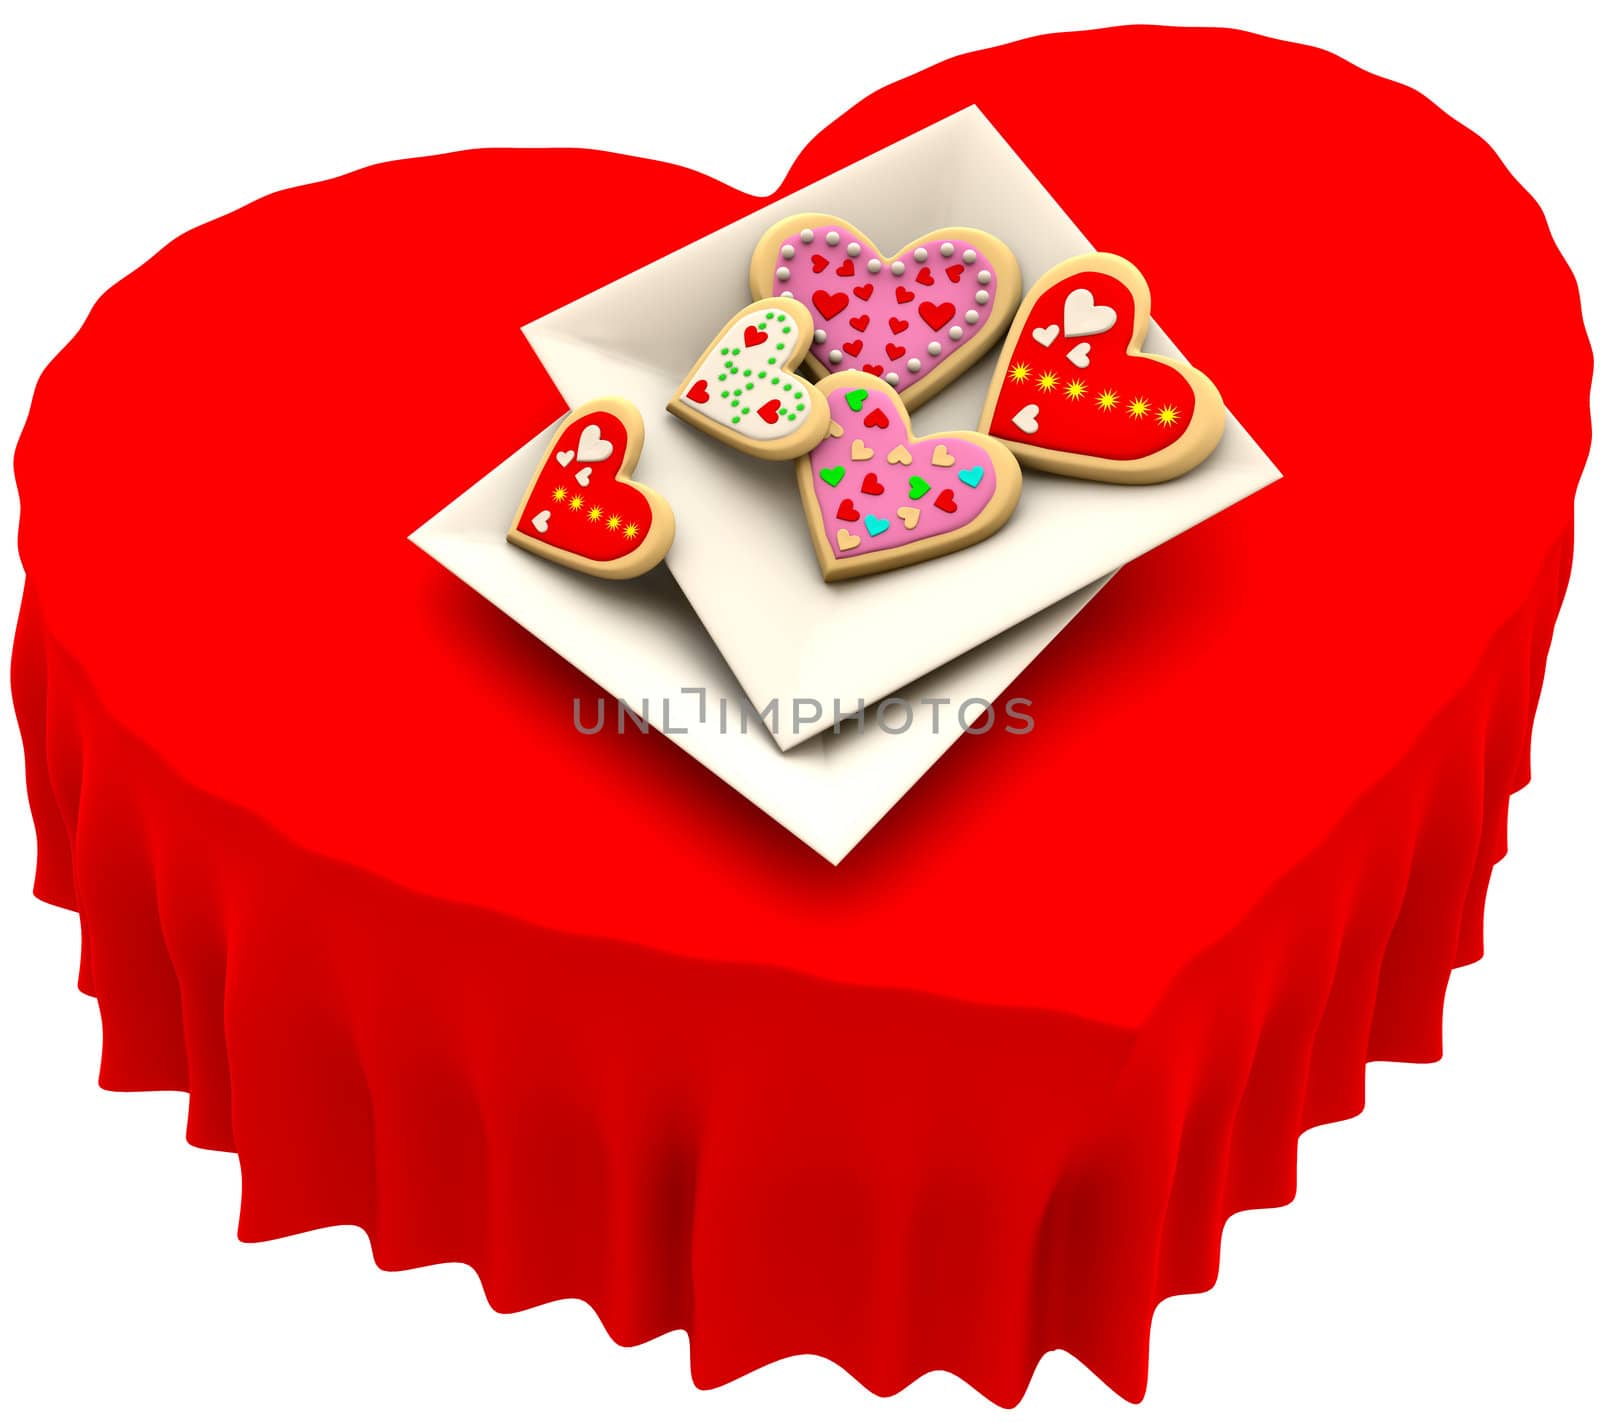 Allsorts individual heart-shaped butter cookies on the square plate for Valentine's Day